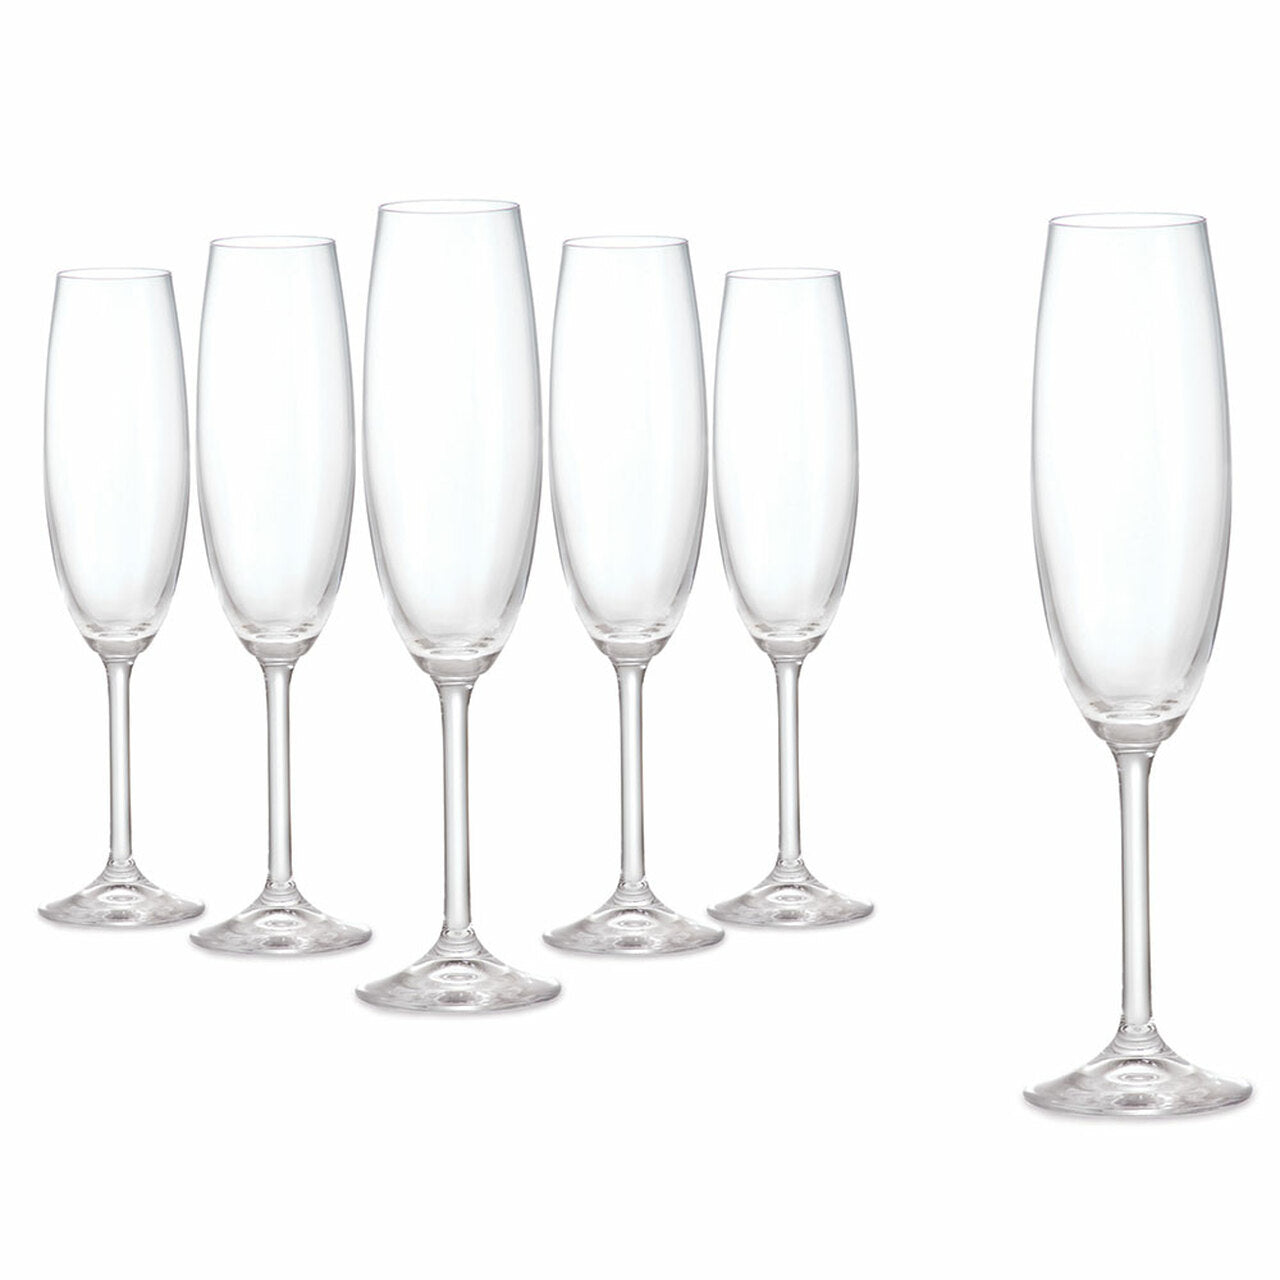 Tipperary Crystal Connoisseur Set of 6 Champagne Flute 220ml